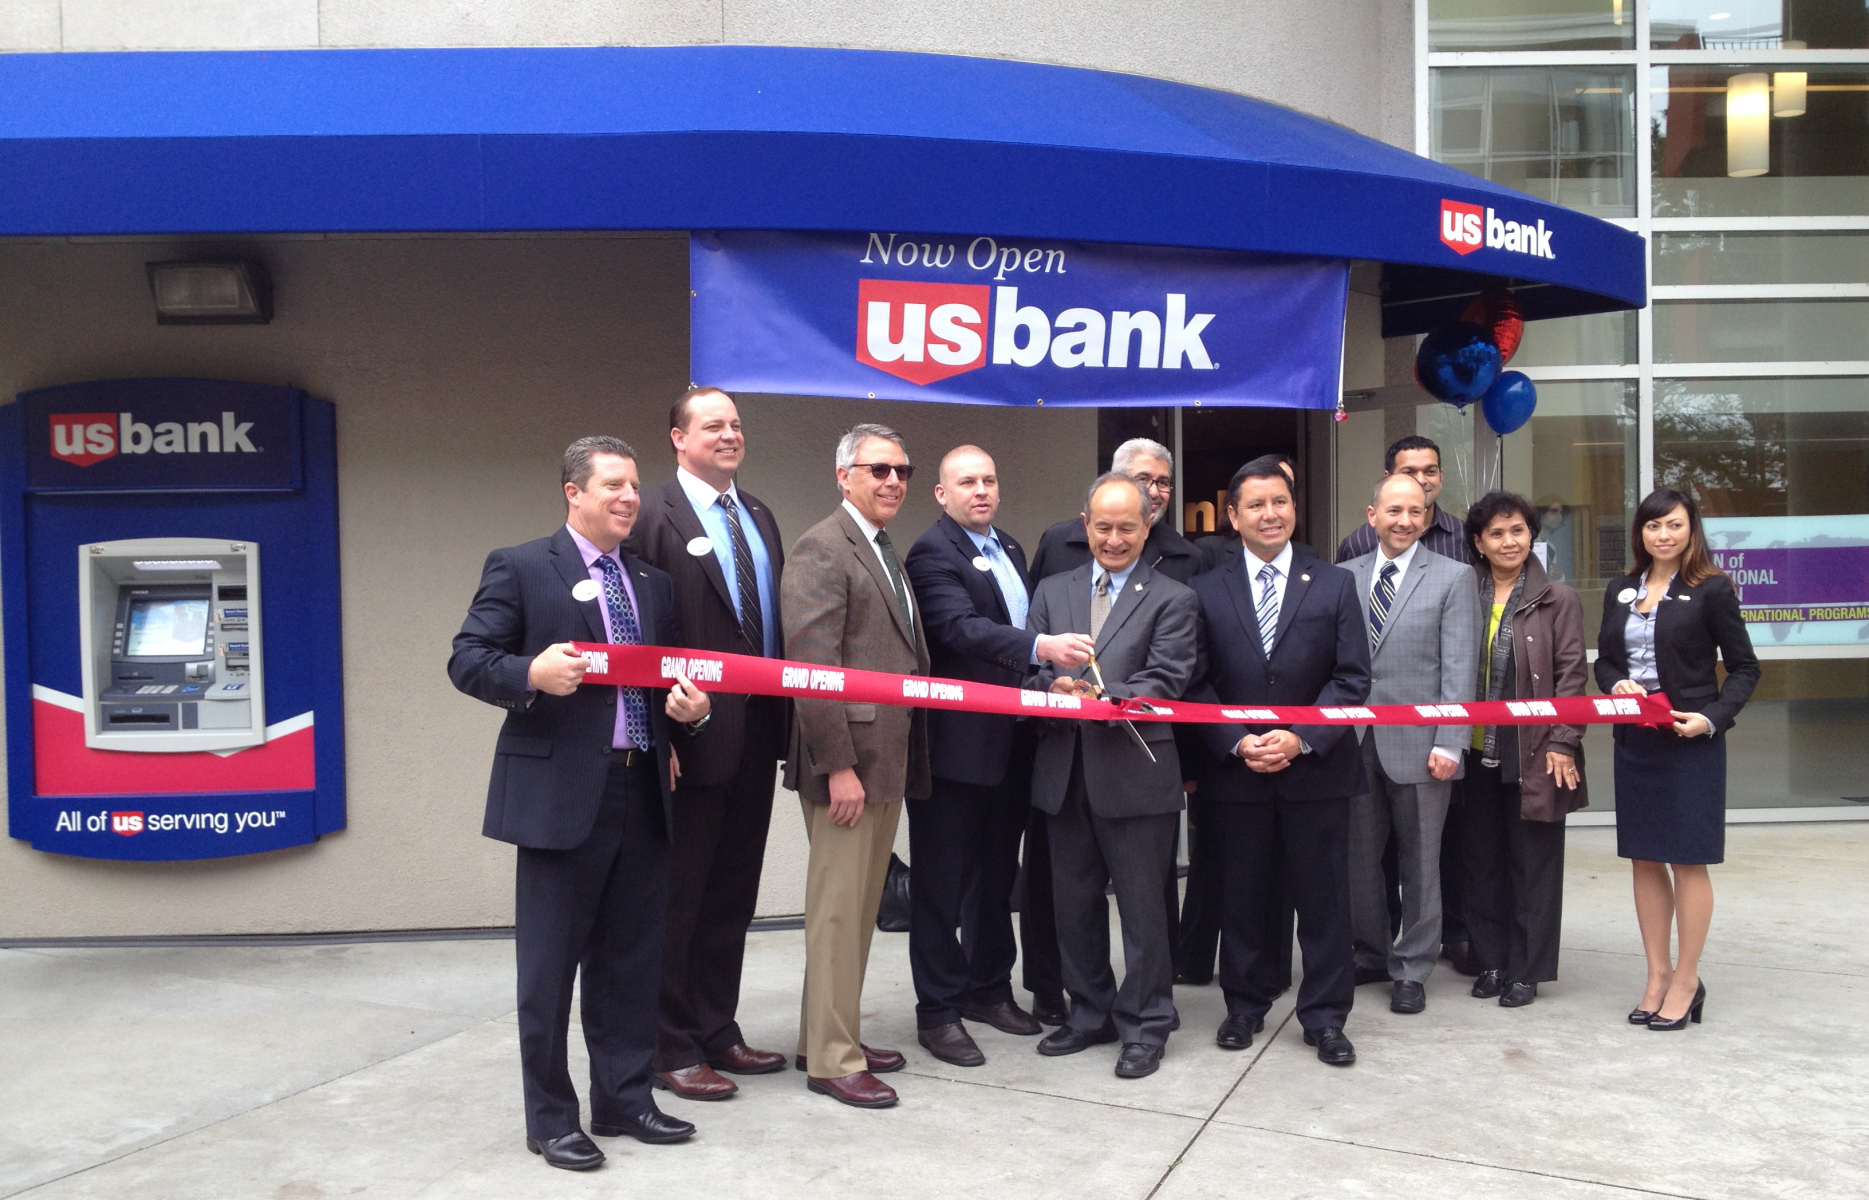 US Bank Storefront - Opening Day